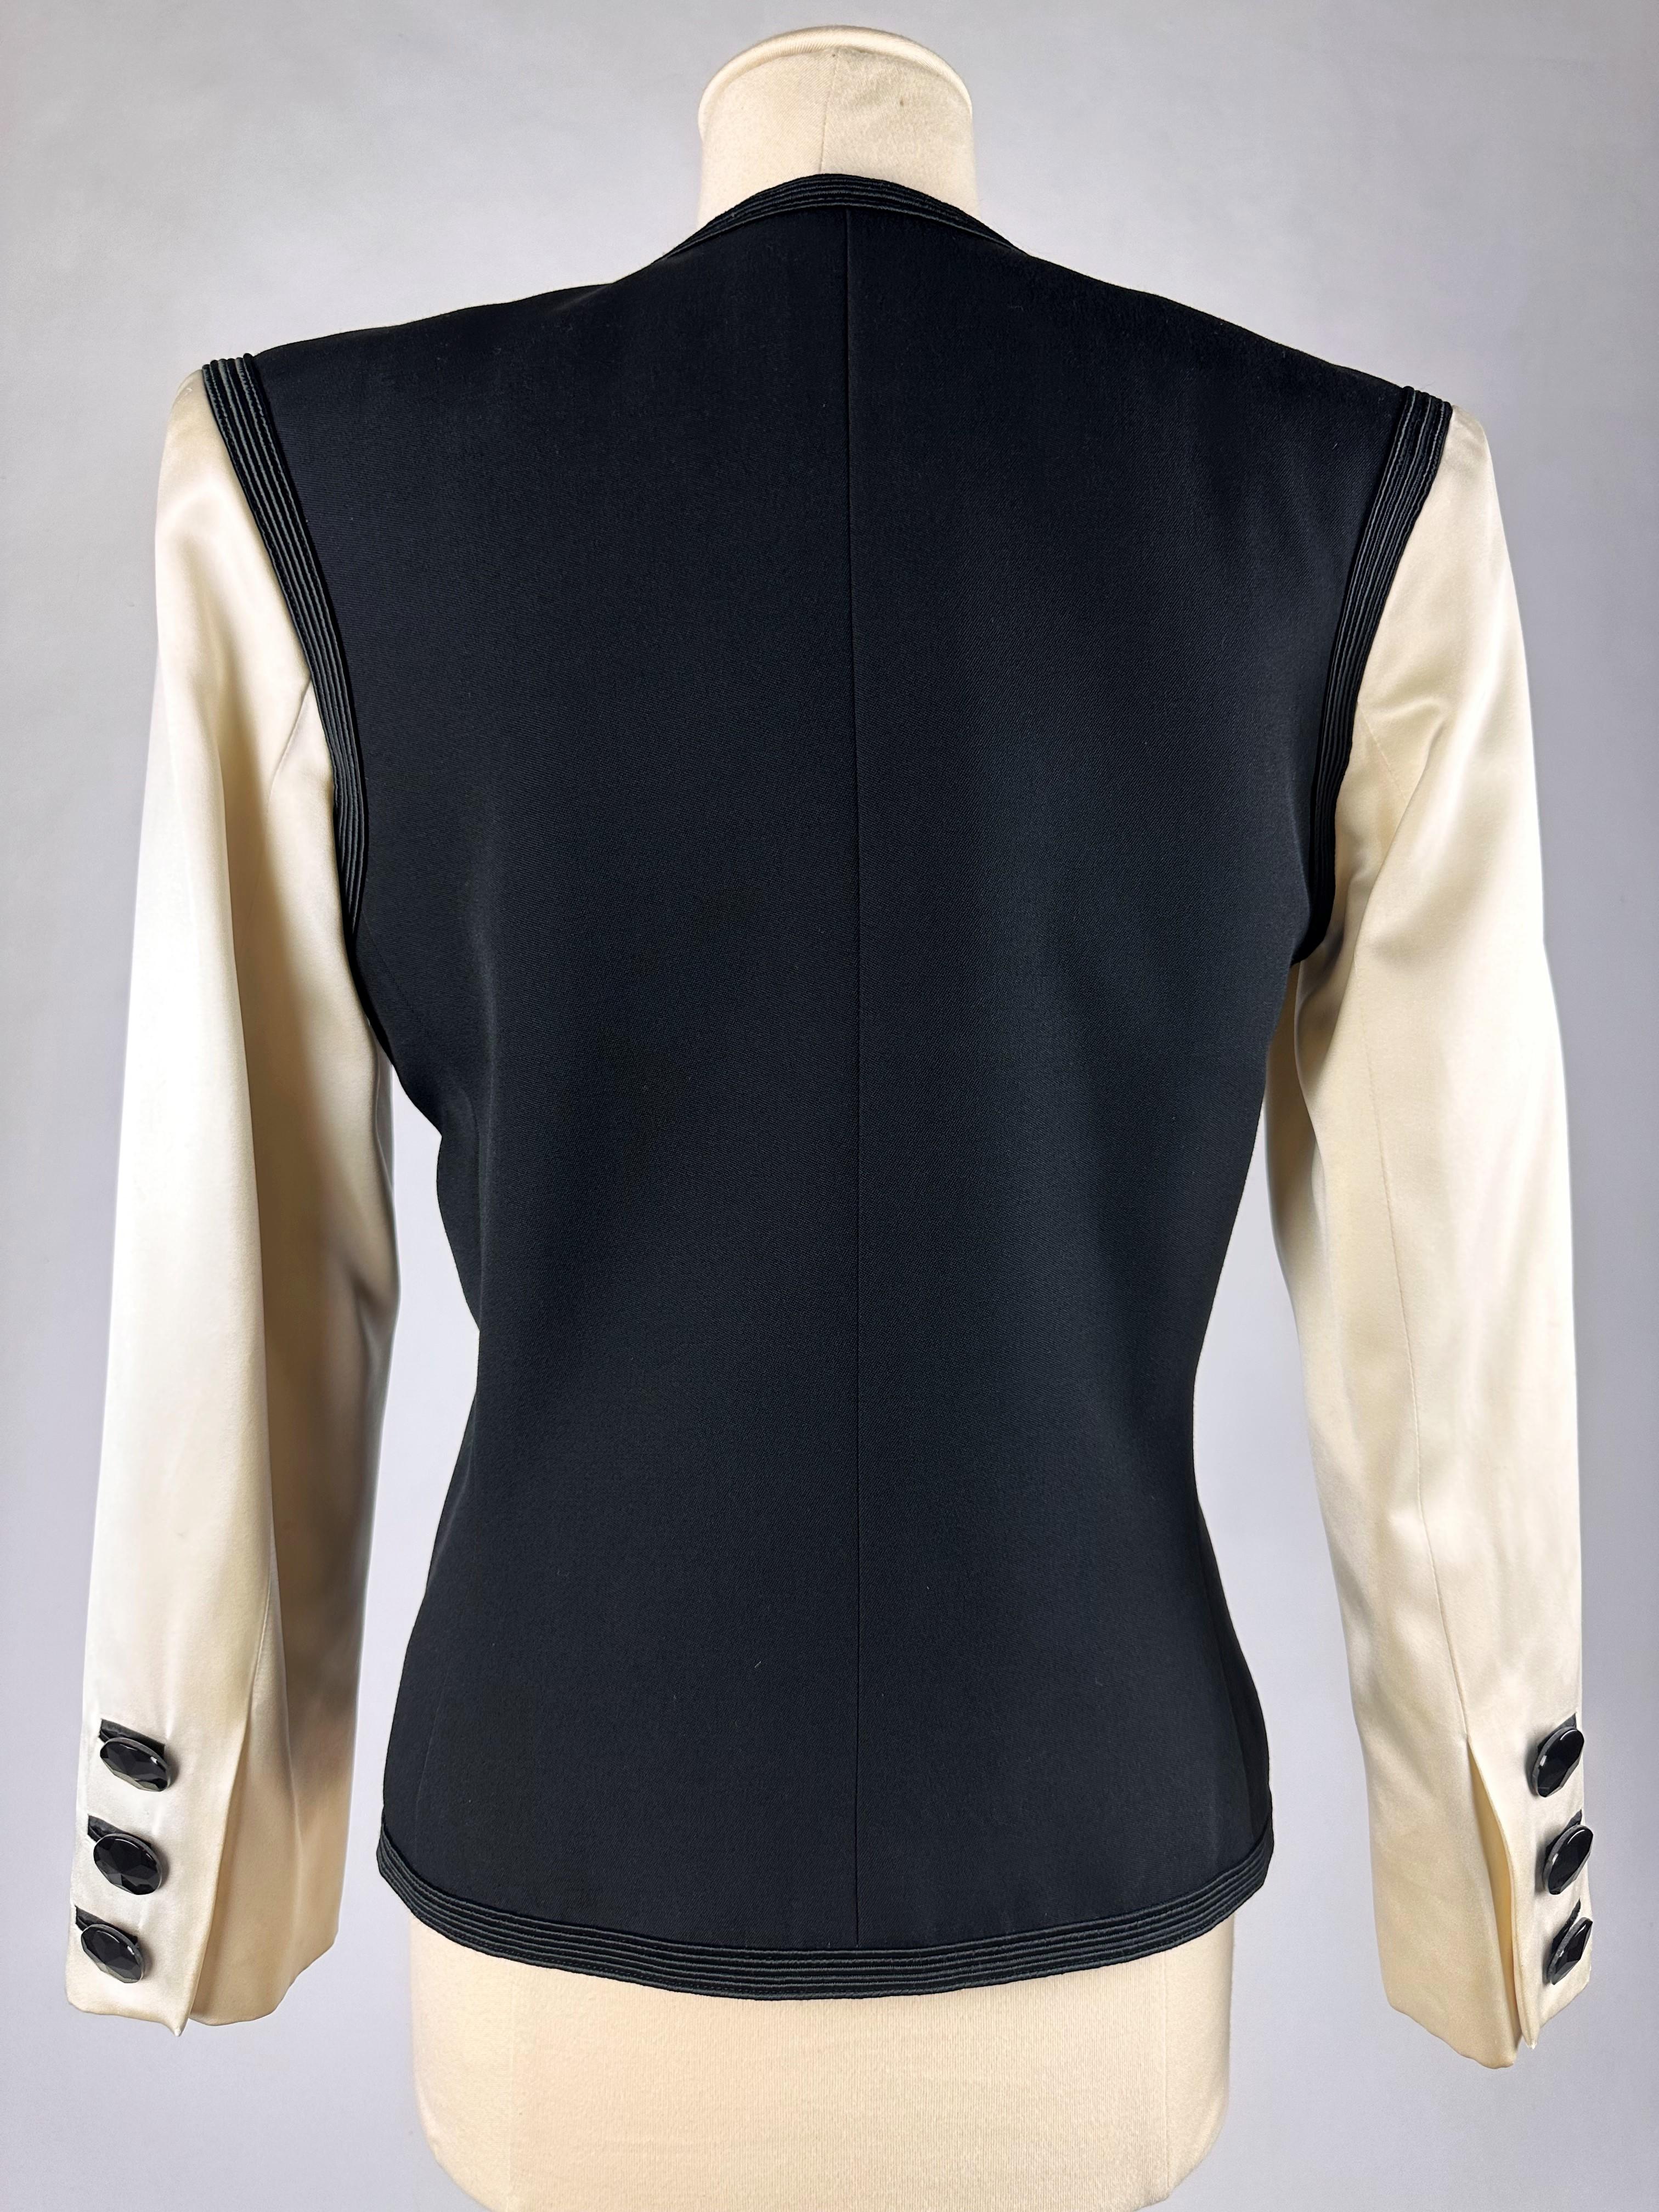 An Yves Saint Laurent Rive Gauche Jacket inspired by Picasso Circa 1989 2